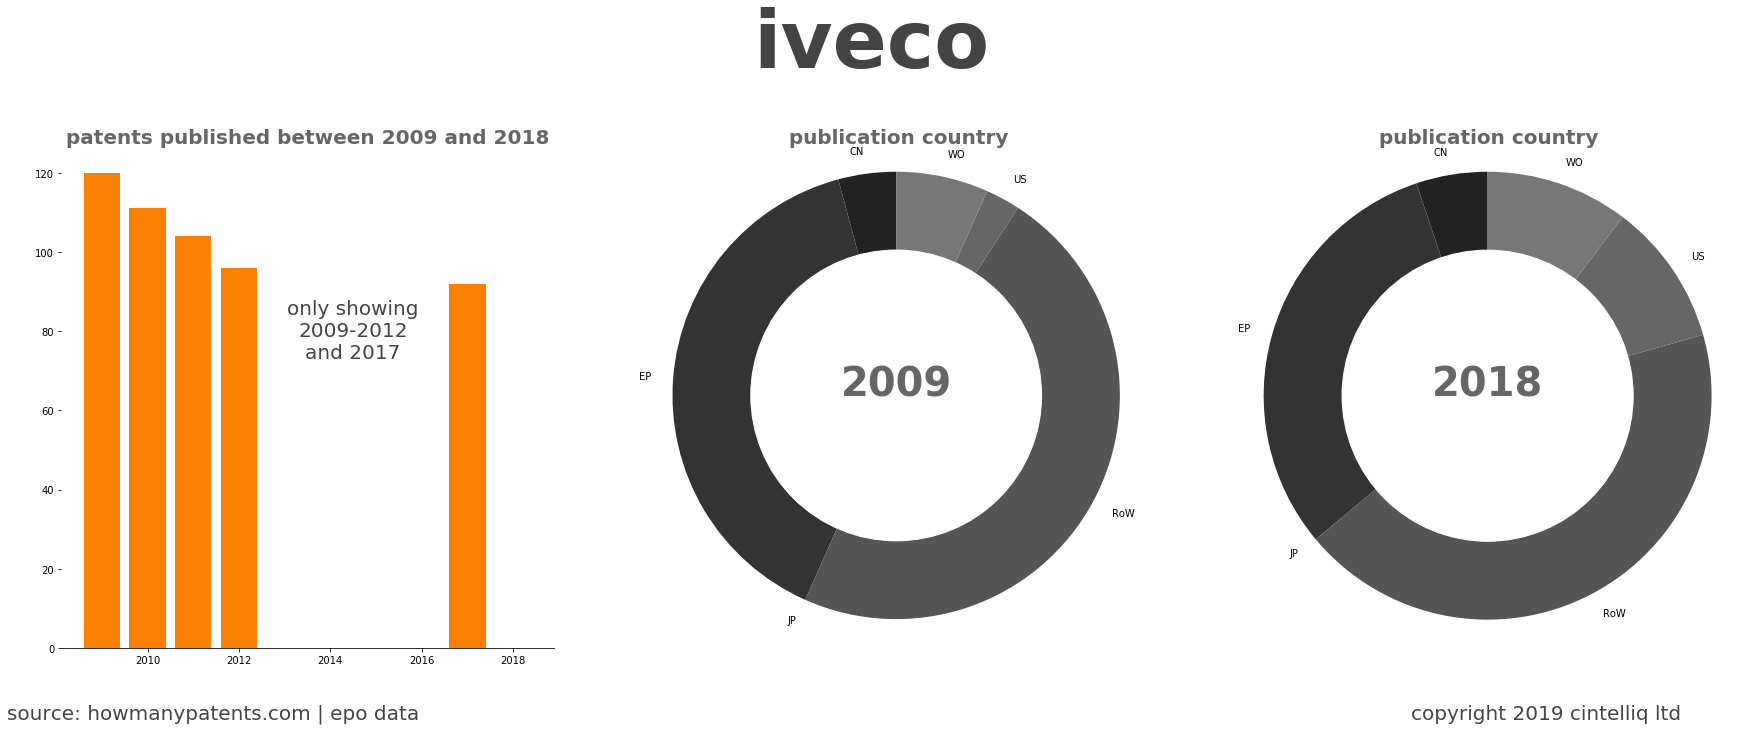 summary of patents for Iveco